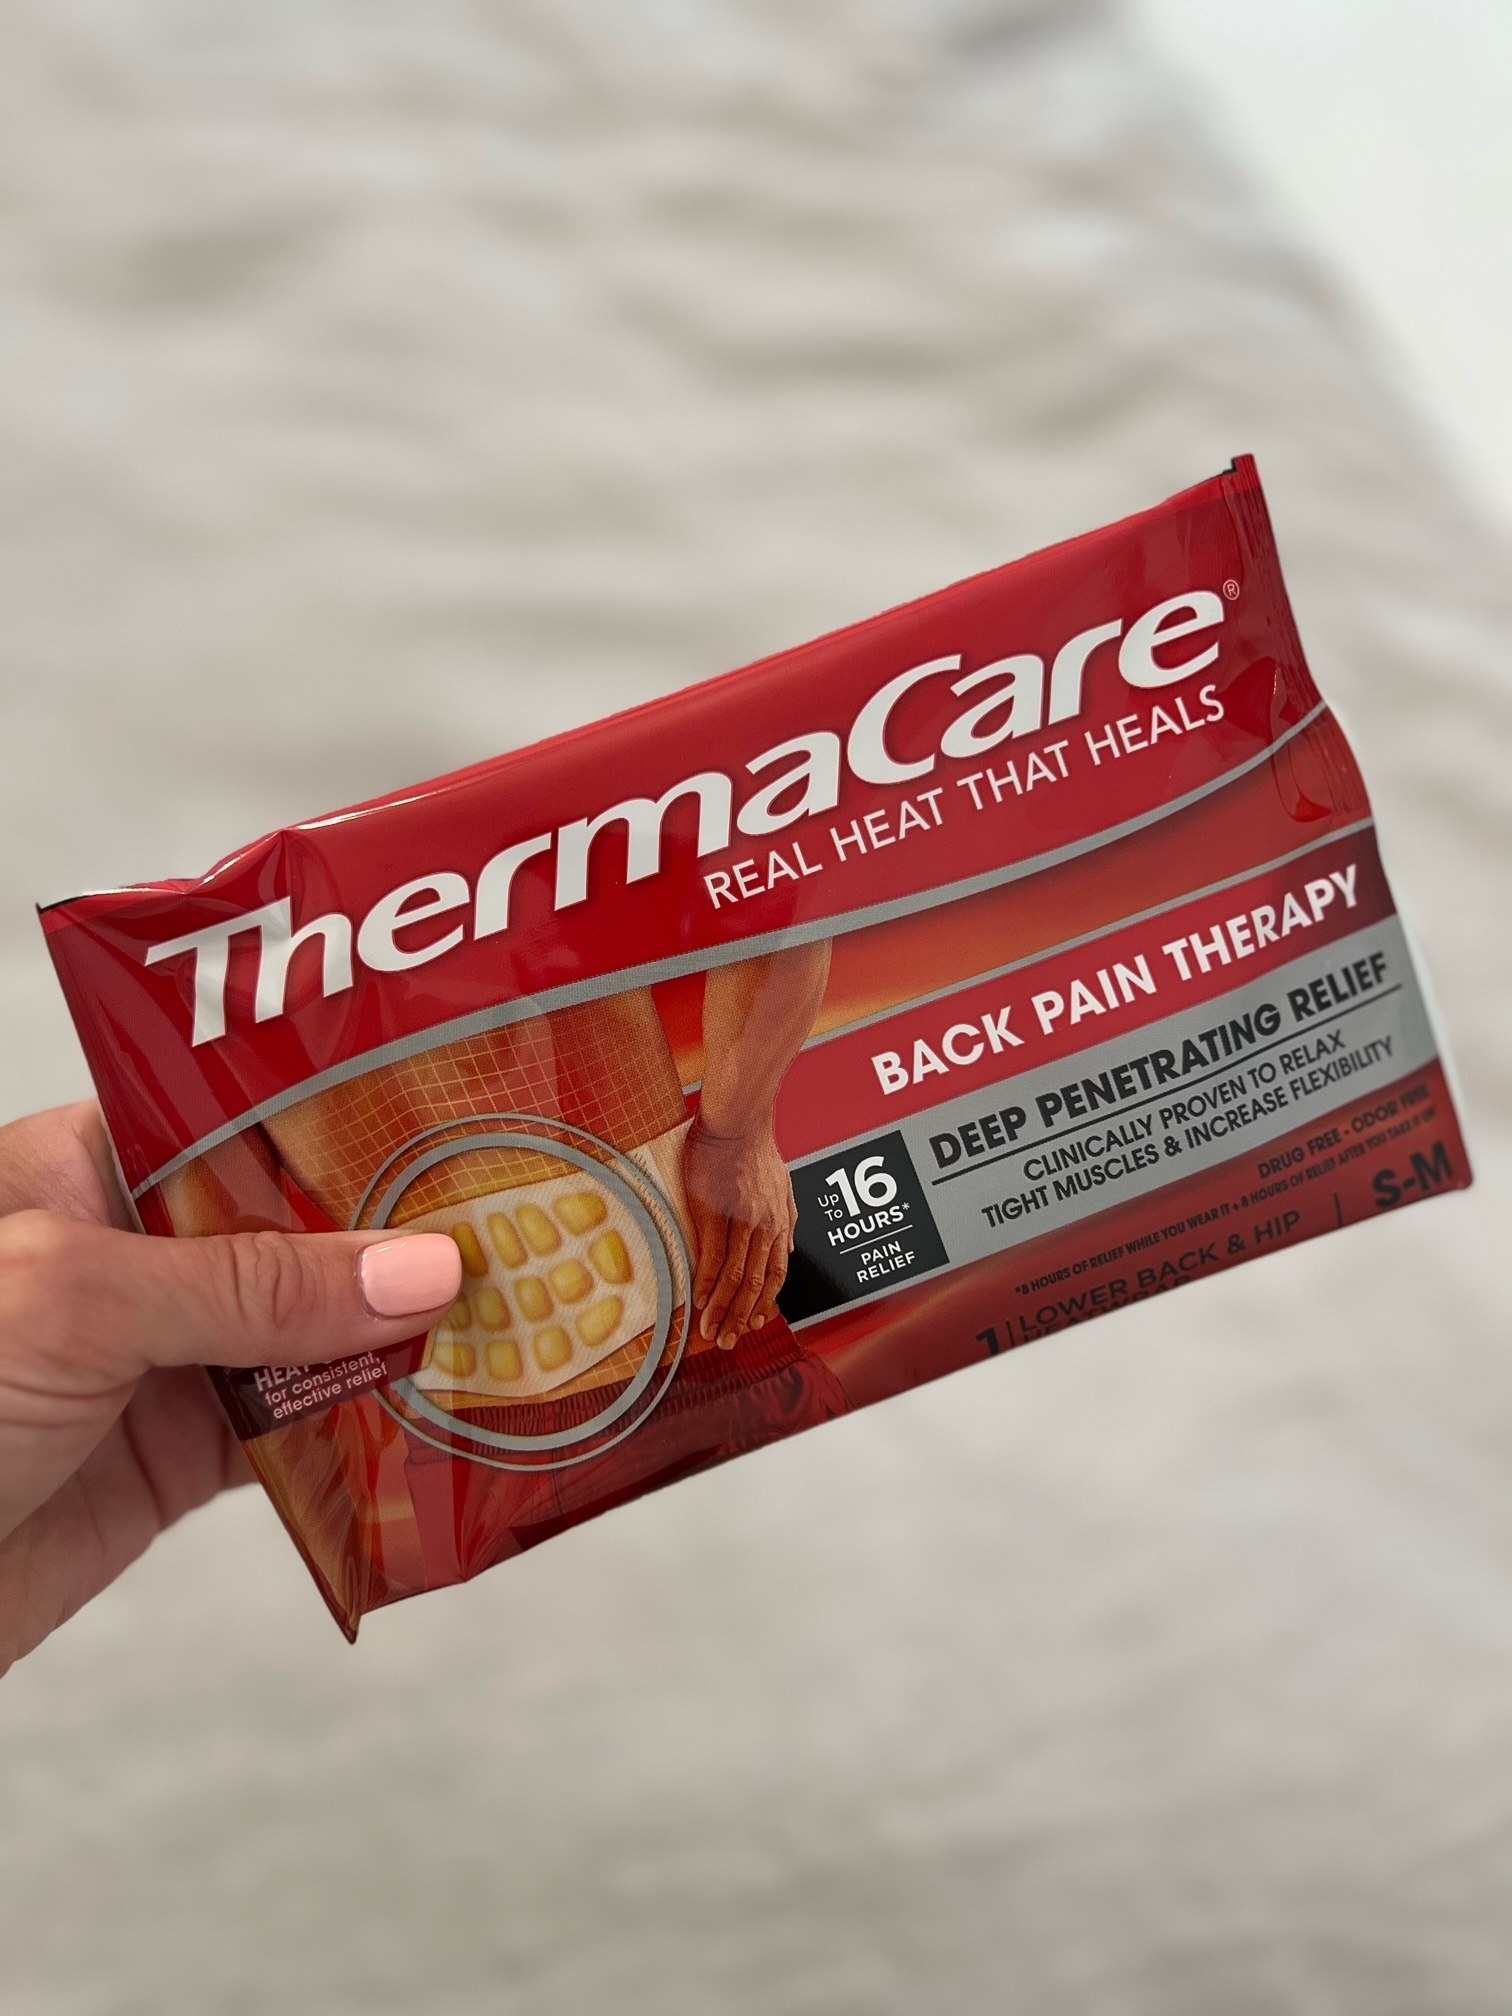 A package of Thermacare heat wraps.